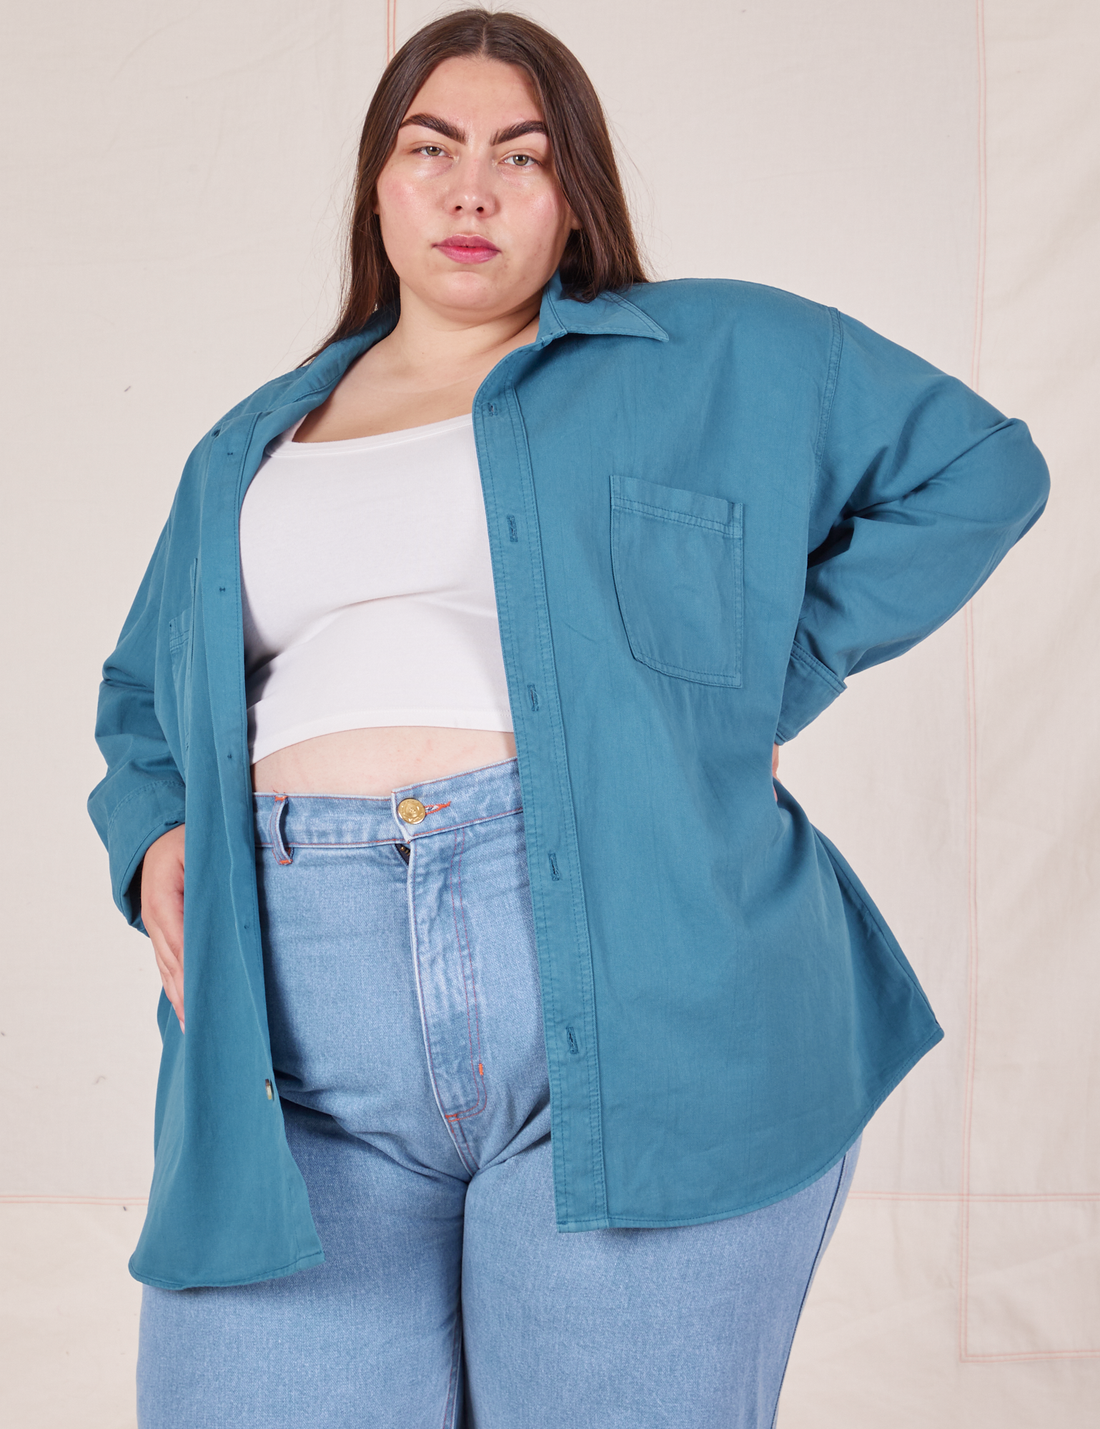 Marielena is wearing Oversize Overshirt in Marine Blue and a vintage off-white Cropped Tank Top underneath